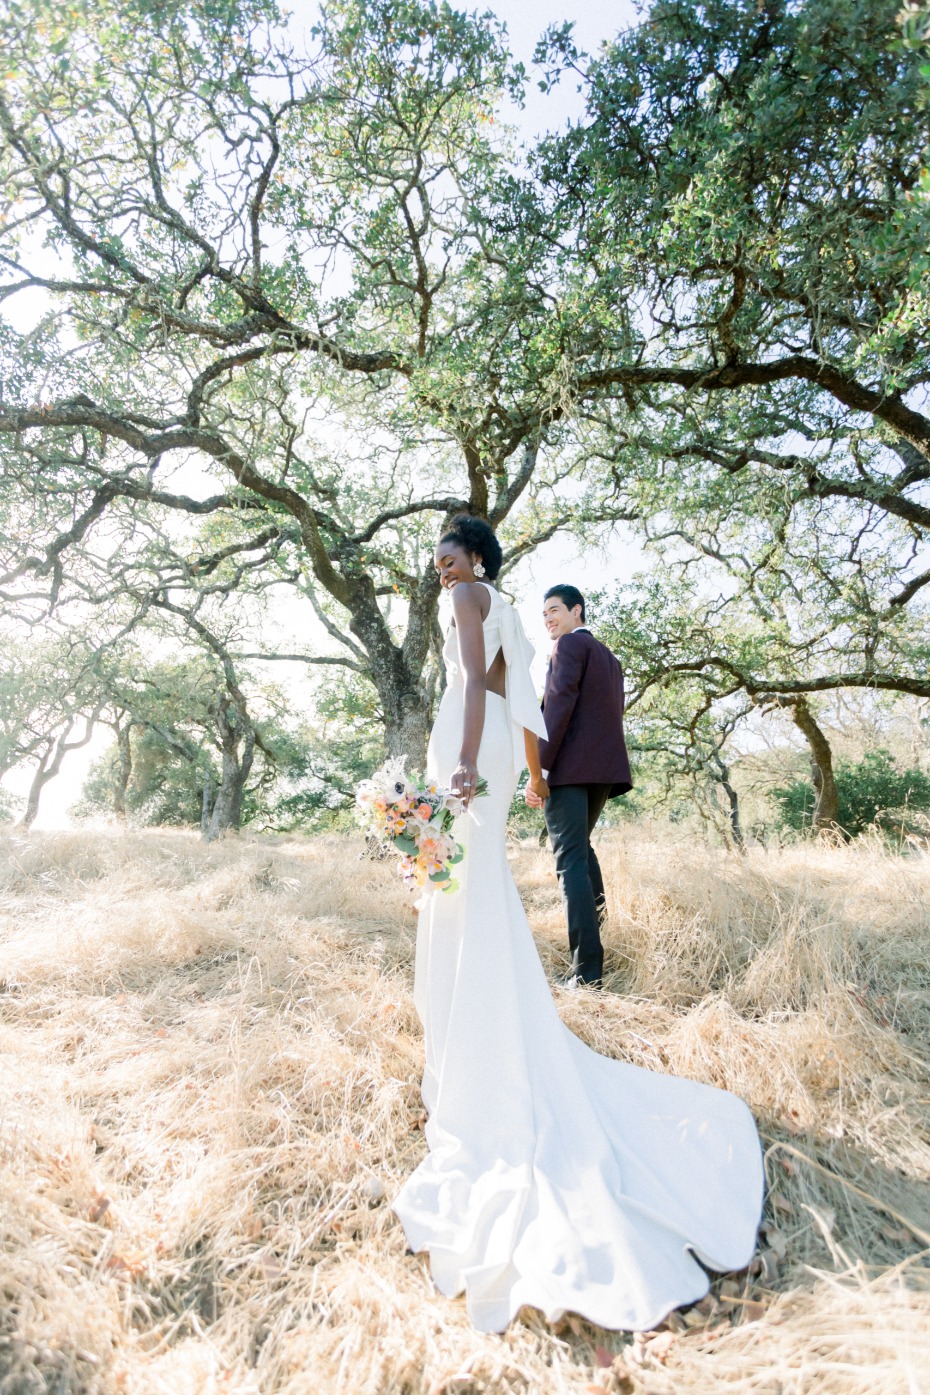 This California Wedding Venue Is Known For It's Outdoor Spaces and Perfectly Paired Menus